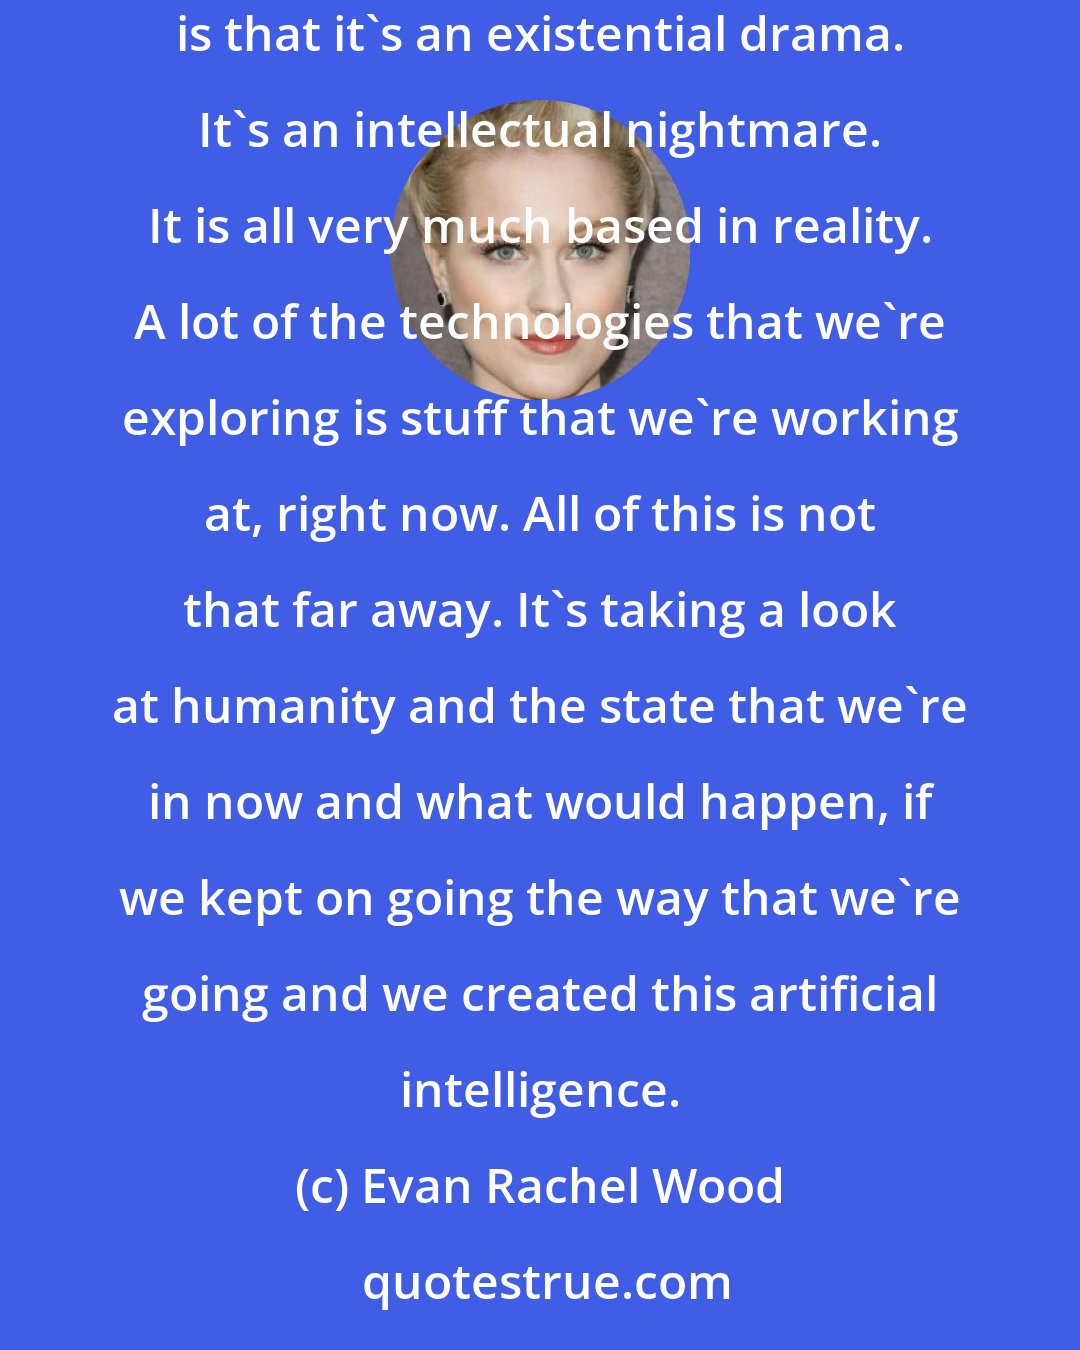 Evan Rachel Wood: All of the action, and the Wild West West fun, crazy, HBO stuff is in there and it's all amazing, but what separates the show [ Westworld] is that it's an existential drama. It's an intellectual nightmare. It is all very much based in reality. A lot of the technologies that we're exploring is stuff that we're working at, right now. All of this is not that far away. It's taking a look at humanity and the state that we're in now and what would happen, if we kept on going the way that we're going and we created this artificial intelligence.